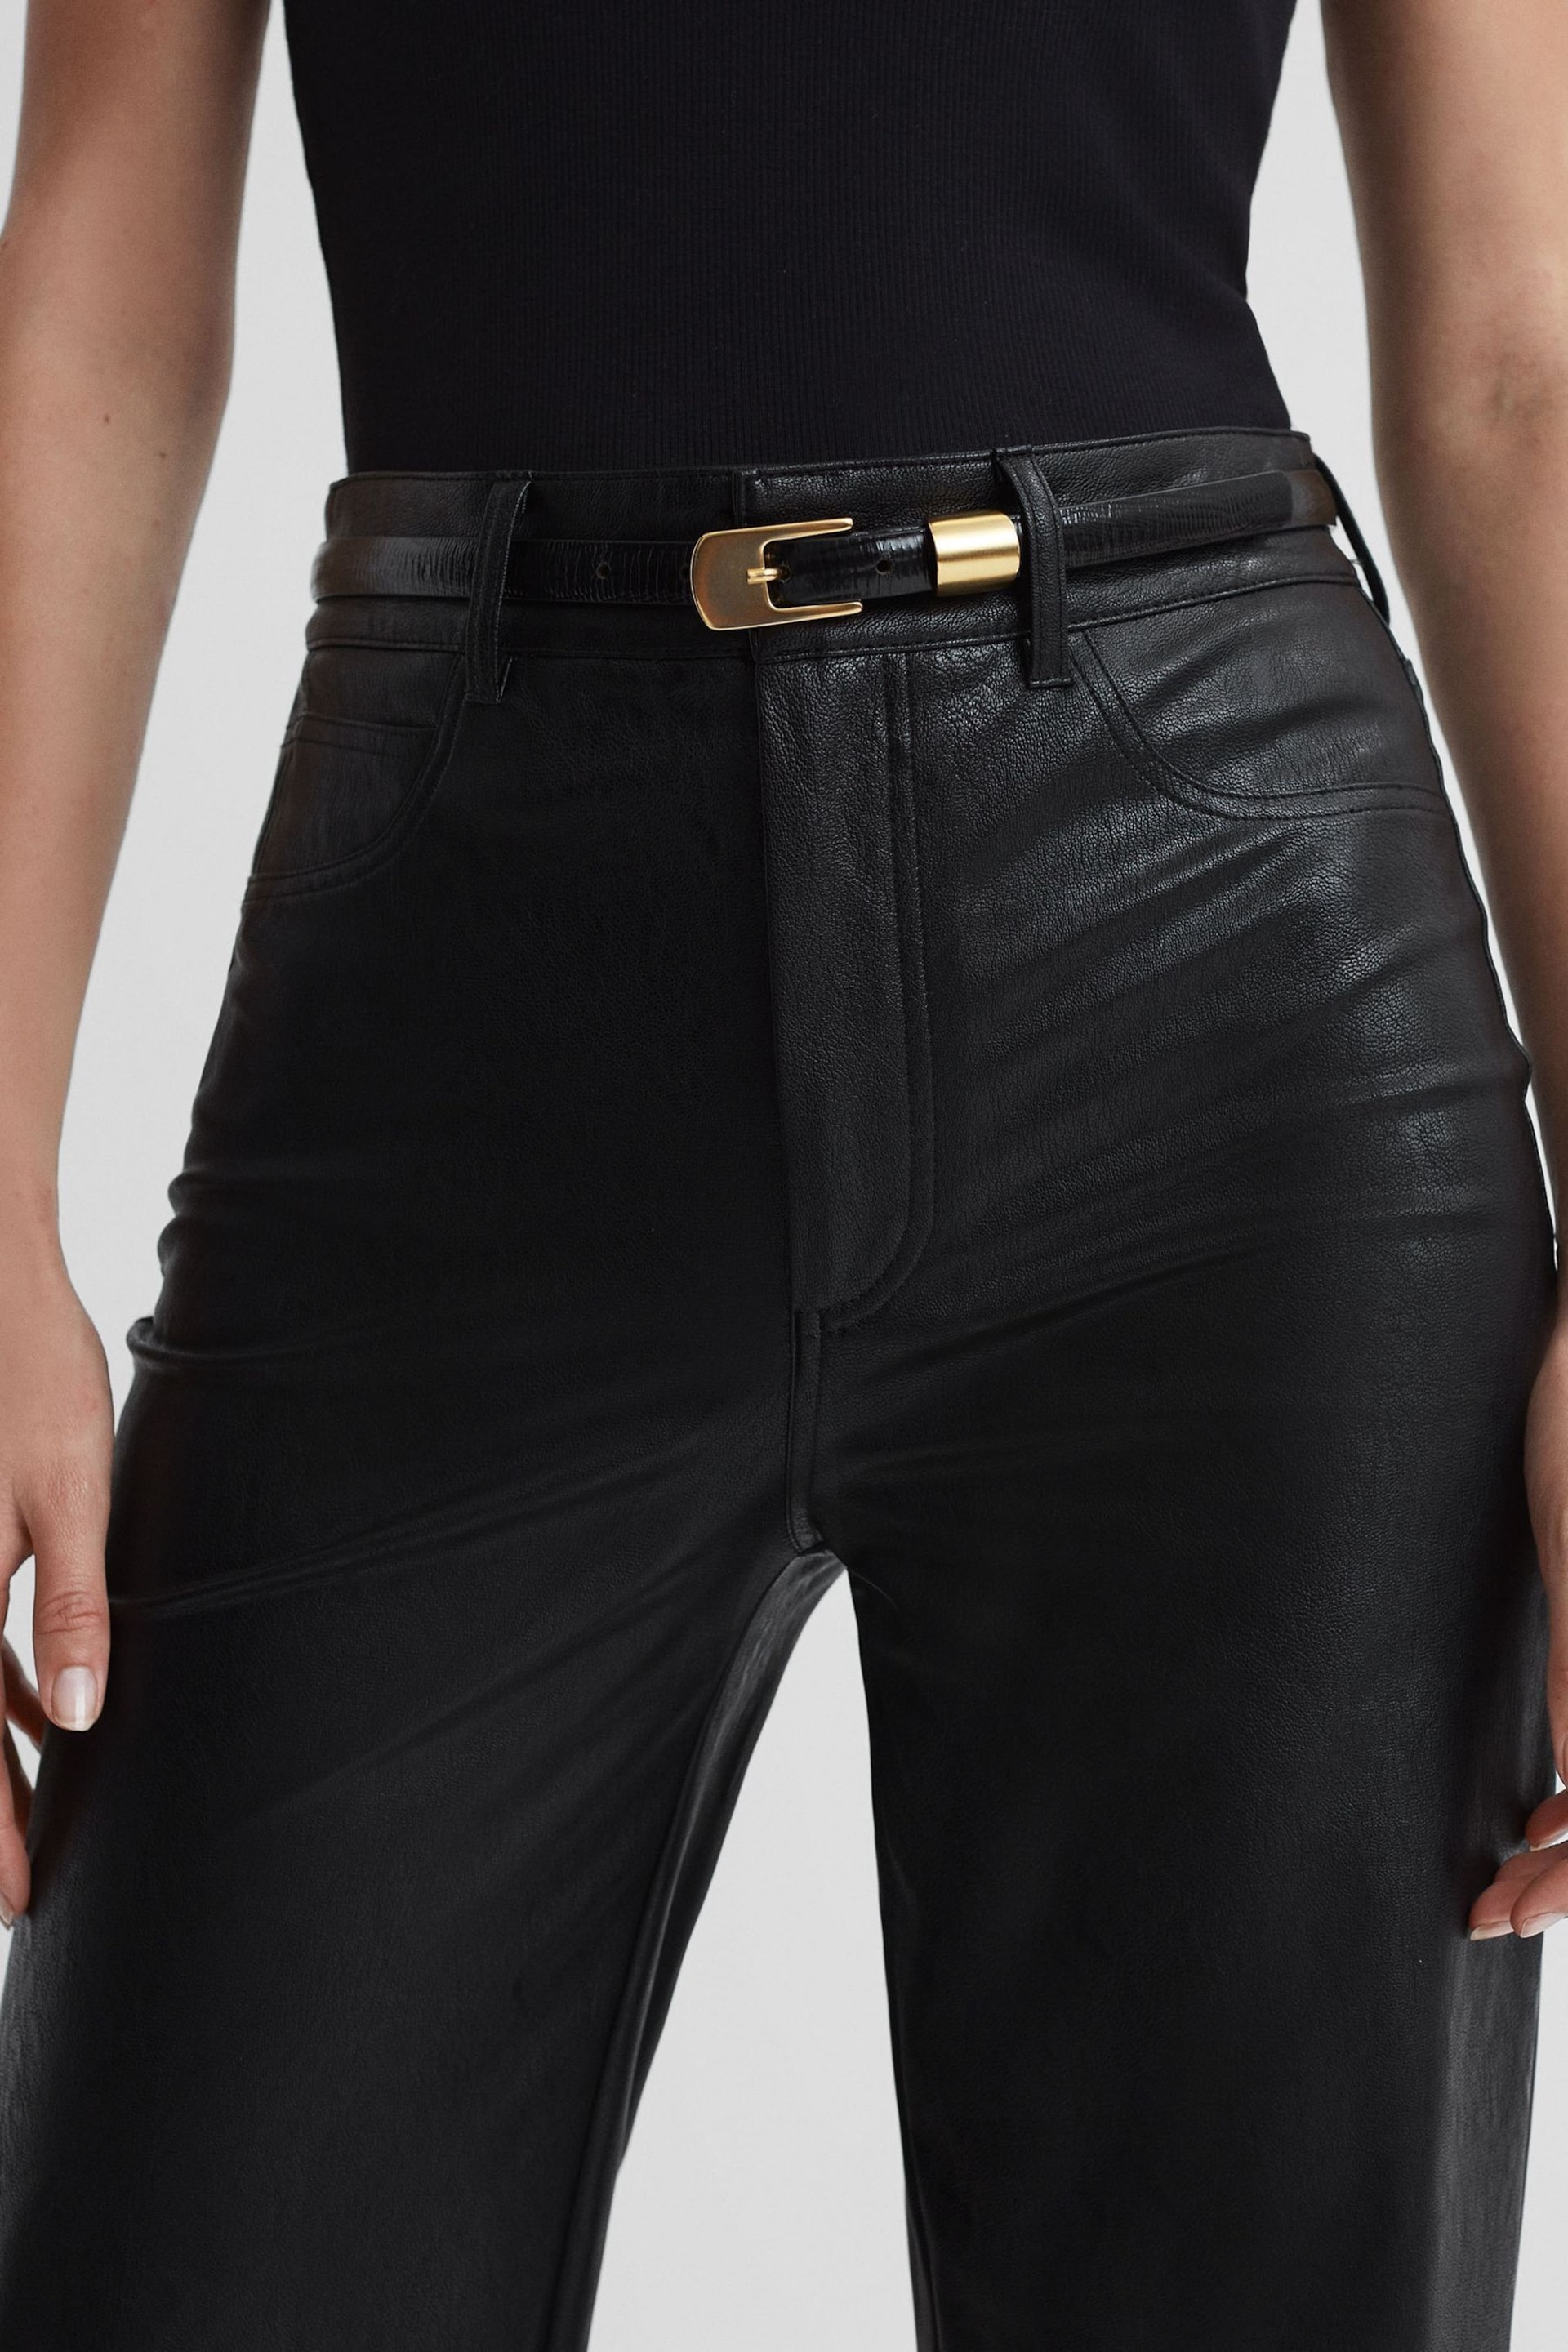 Paige Sasha Faux Leather High Rise Straight Black Trousers - Image 4 of 7